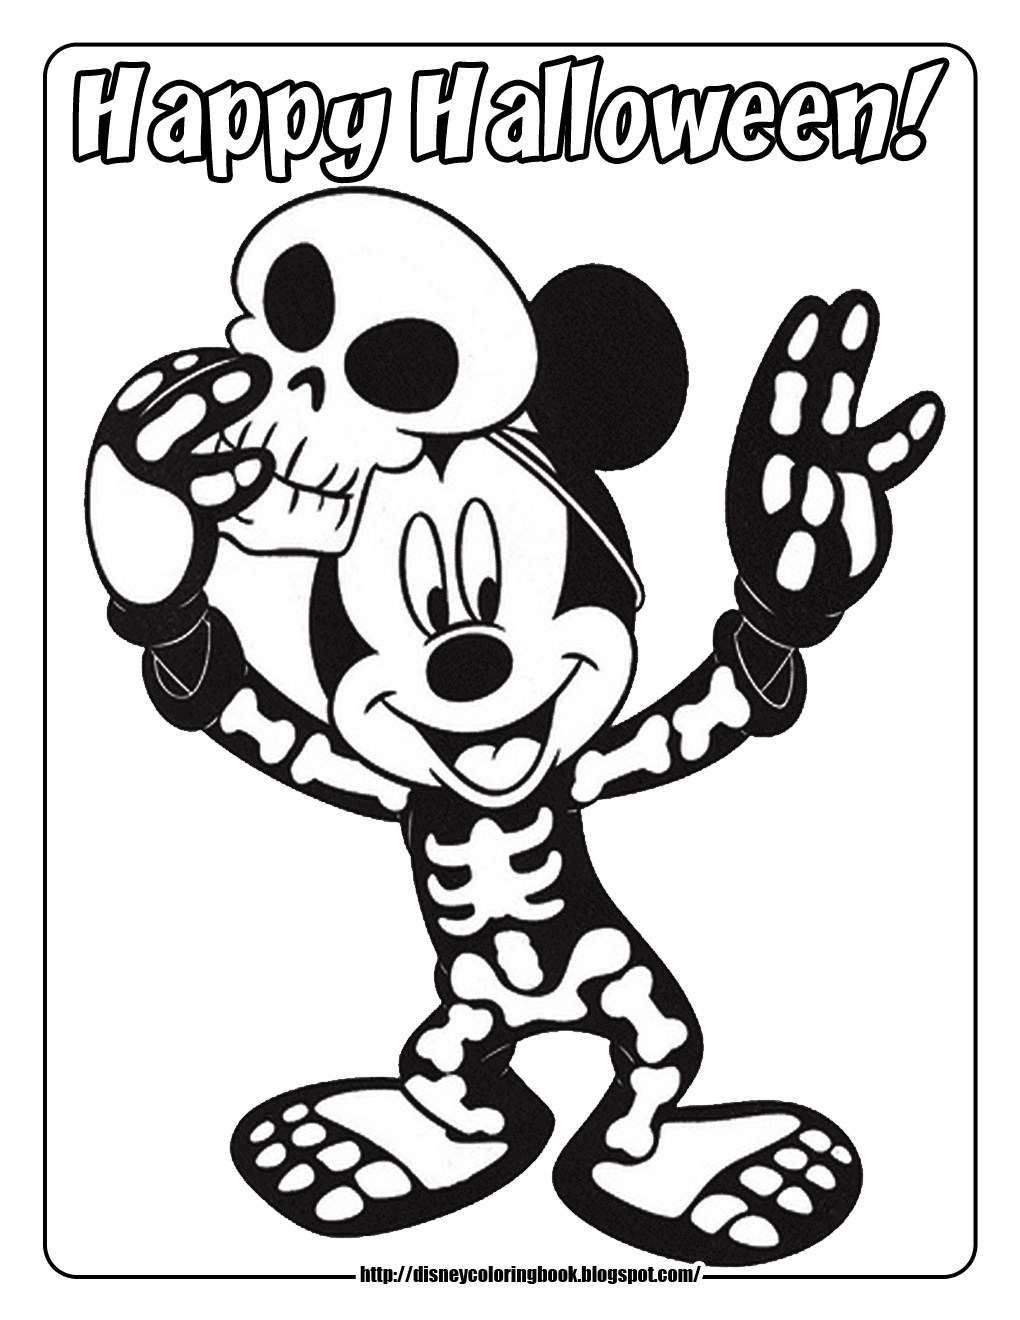 Mickey and Friends Halloween 3: Free Disney Halloween Coloring Pages